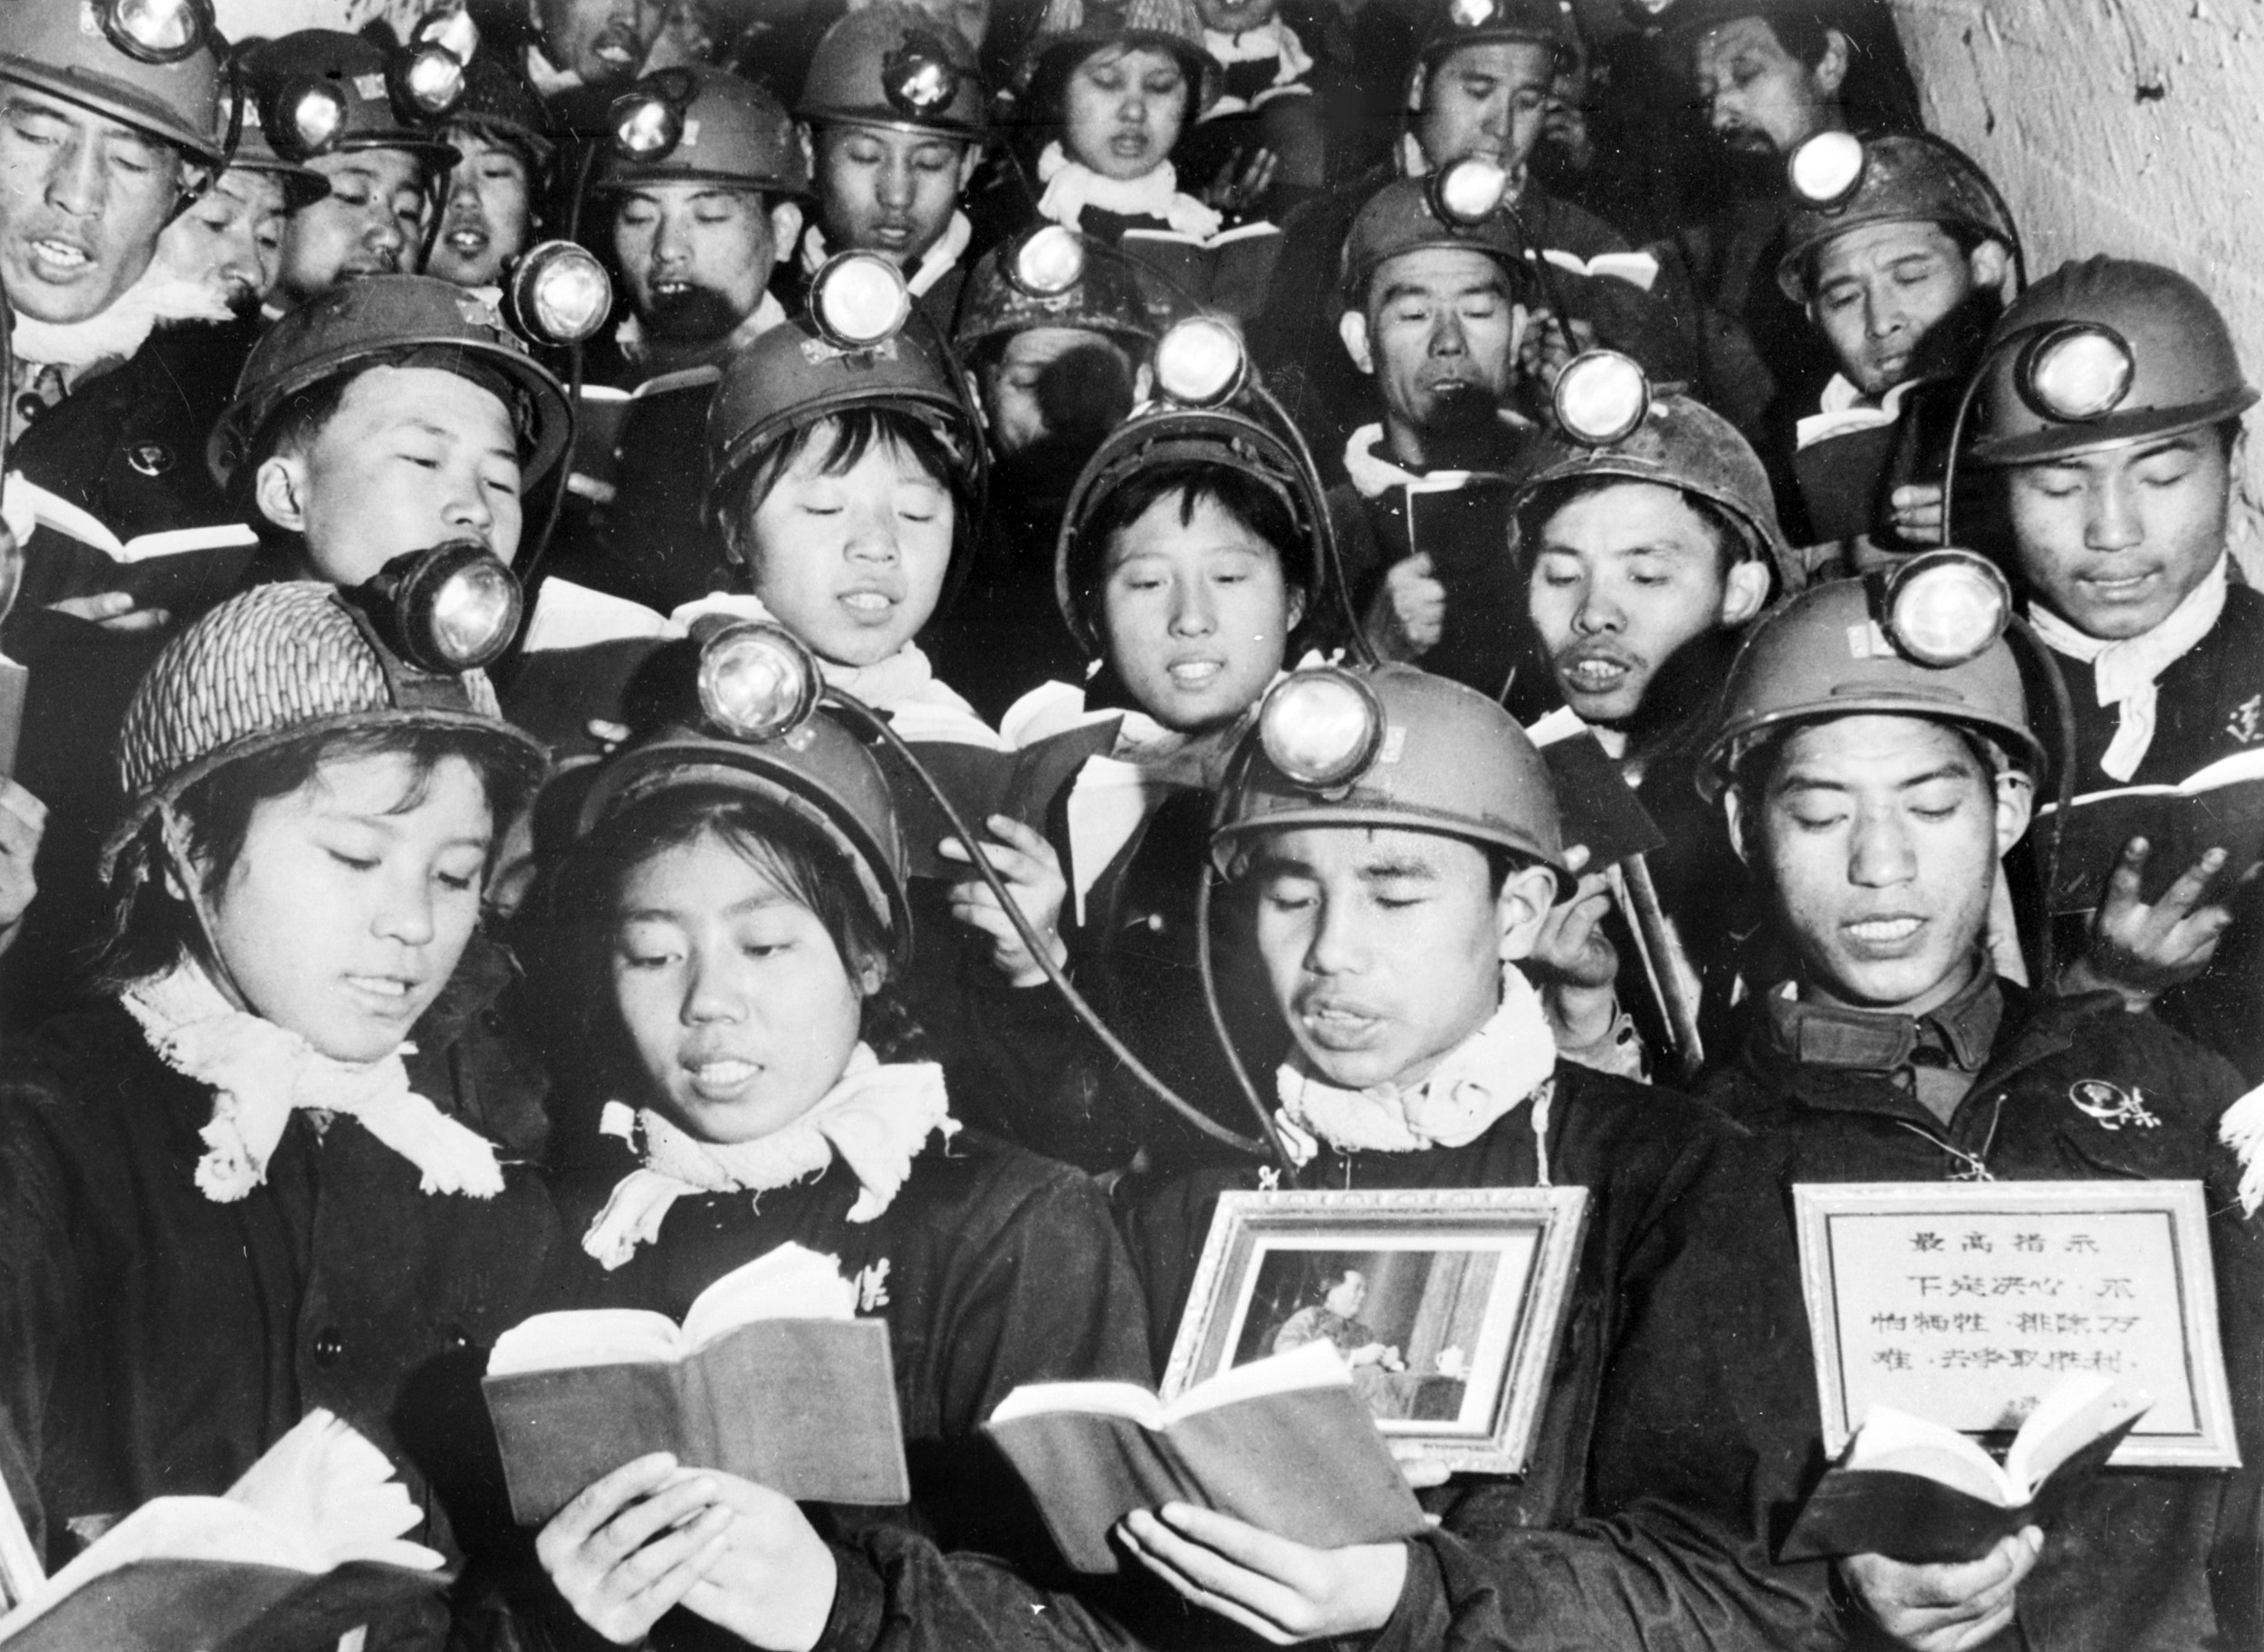 TO GO WITH VARIOUS AFP STORIES "China-politics-history" (FILES) This file photo dated 06 September, 1968 shows a group of male and female coal miners reciting in Li Se Yuan mine some paragraphs of Mao Zedong "Little Red Book" as they celebrate Mao's "Great Proletarian Cultural Revolution". May 16, 2006 marks the 40th anniversary of the official launch of the Great Proletarian Cultural Revolution when Mao Zedong issued a directive charging that "representatives of the bourgeoisie" have infiltrated all levels of the party and intend to establish a "dictatorship". Subsequently millions of people across China were tortured, killed and driven to suicide during the Cultural Revolution (1966-1976), a period of terror and violence now widely known as "10 years of catastrophe". AFP PHOTO/XINHUA/FILES